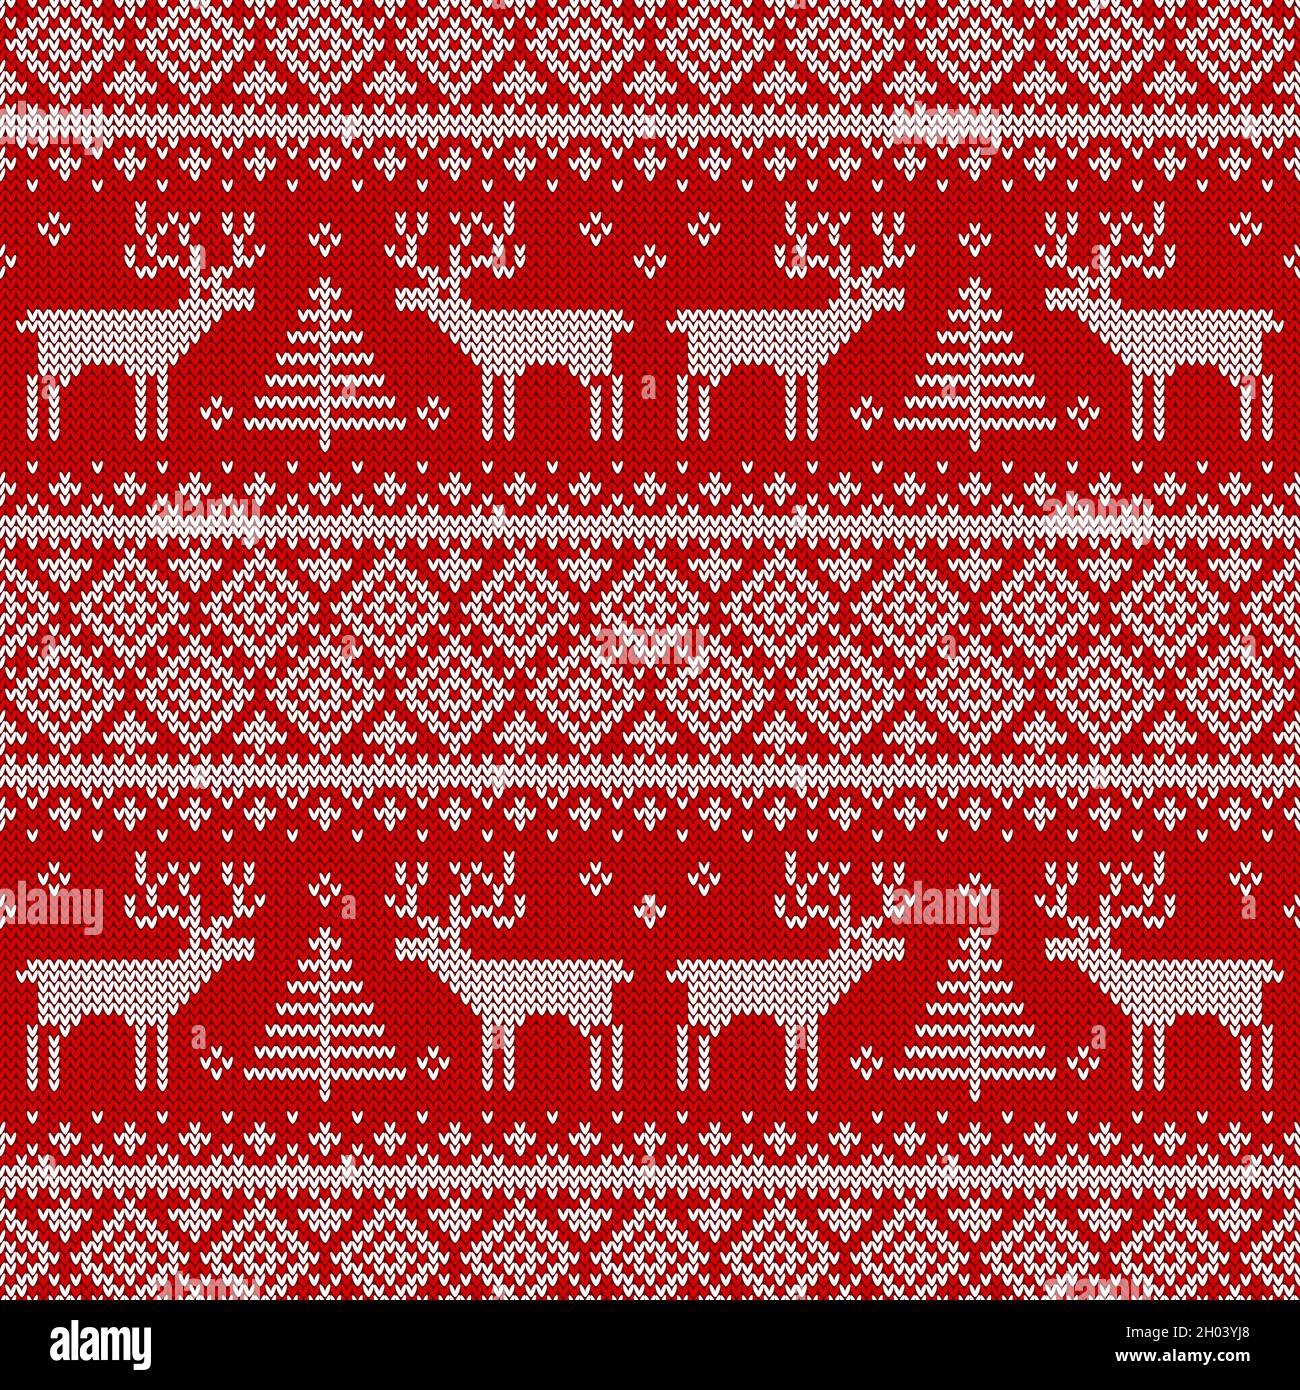 Knitted seamless pattern with deers and trees. Red and white sweater background for Christmas, New Year or winter design. Scandinavian vector ornament Stock Vector